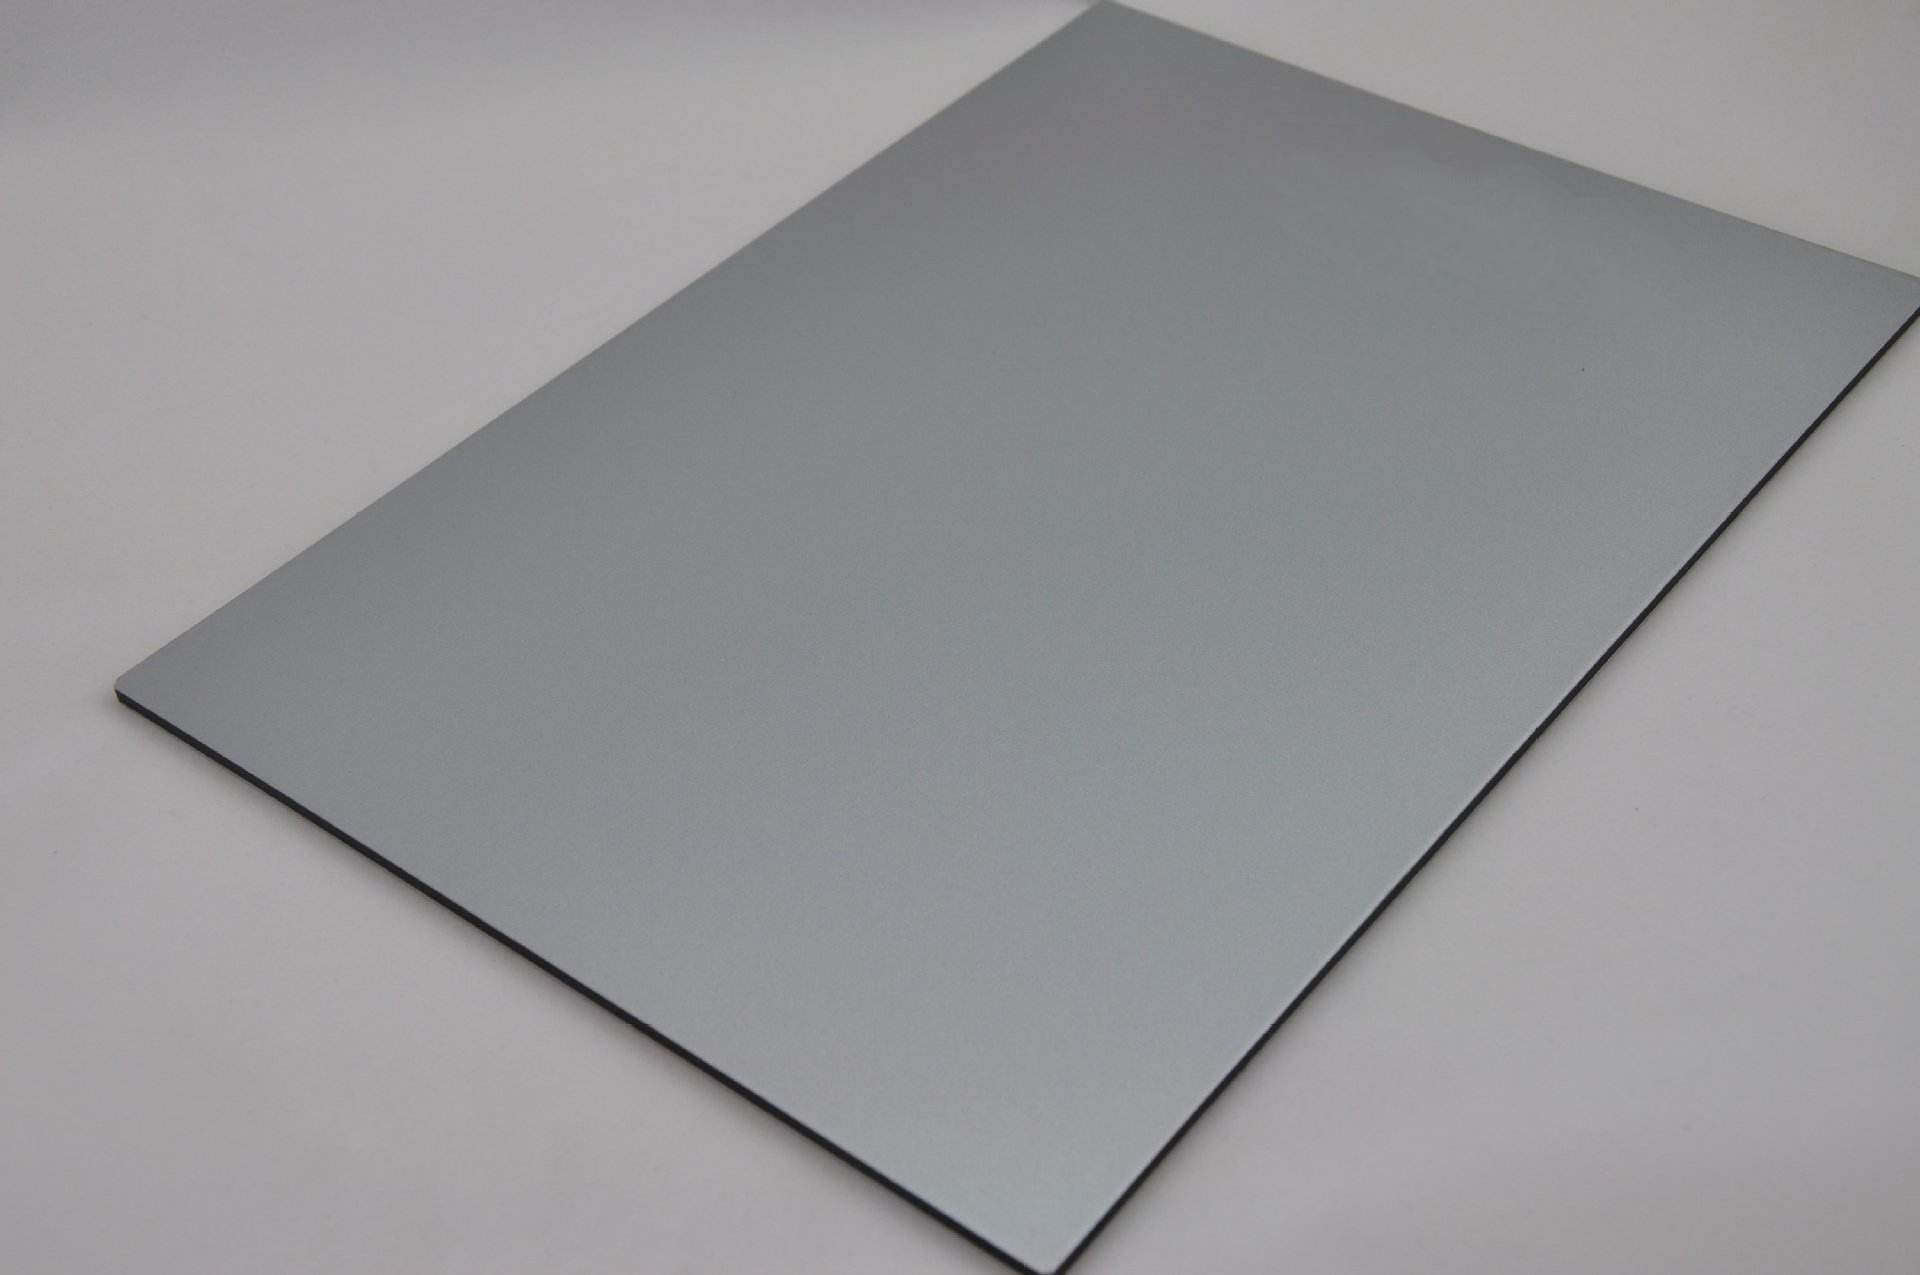 Why is Aluminum Composite Panel So Popular Today?